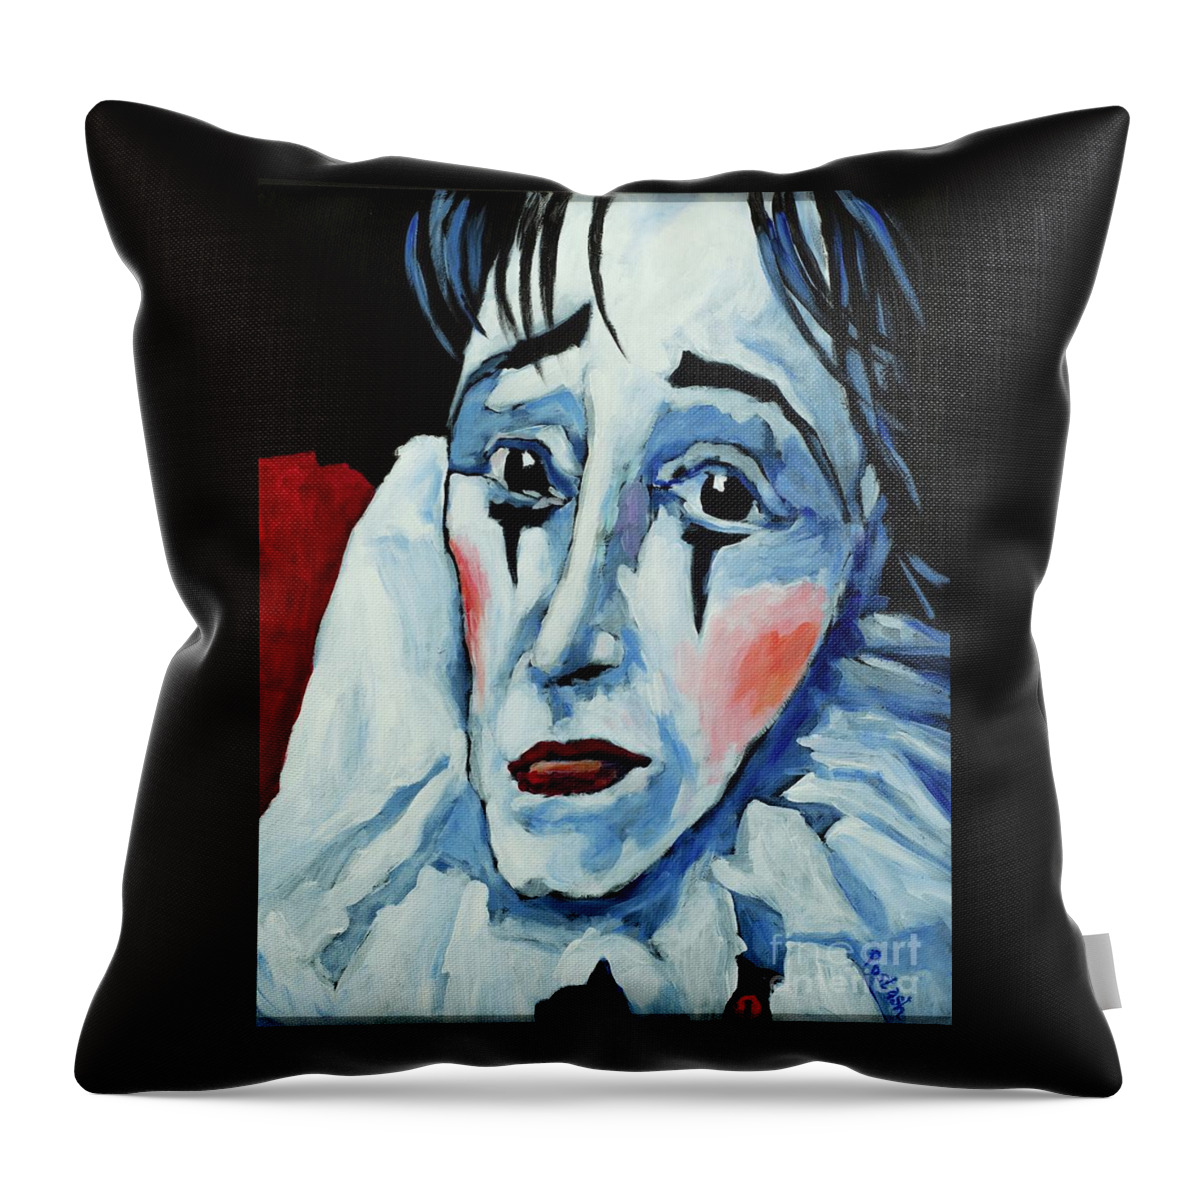 Figurative Throw Pillow featuring the painting Show Must Go On by Igor Postash